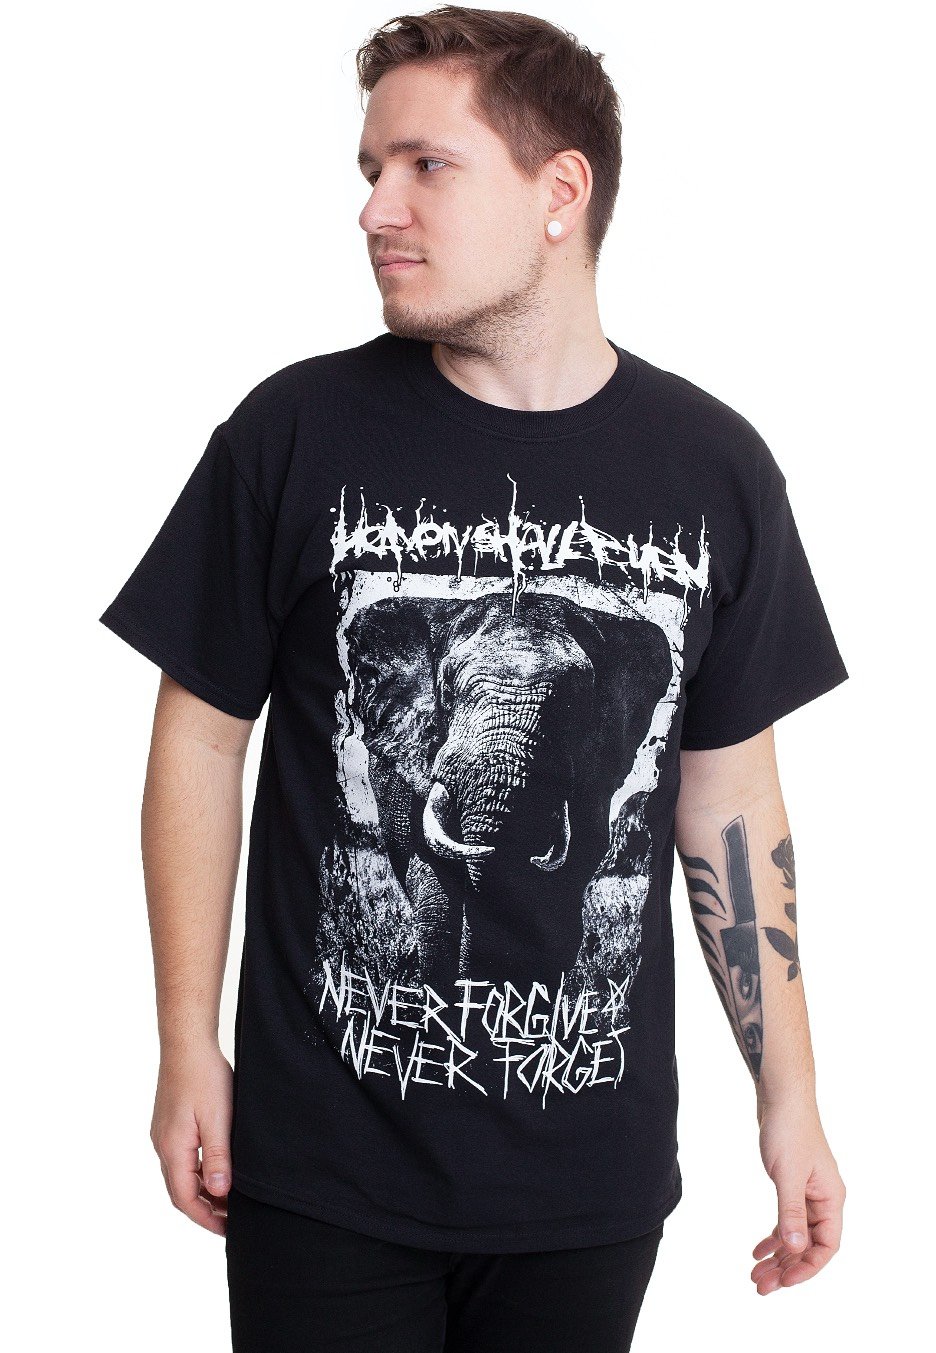 Heaven Shall Burn merch available online in the Nuclear Blast shop